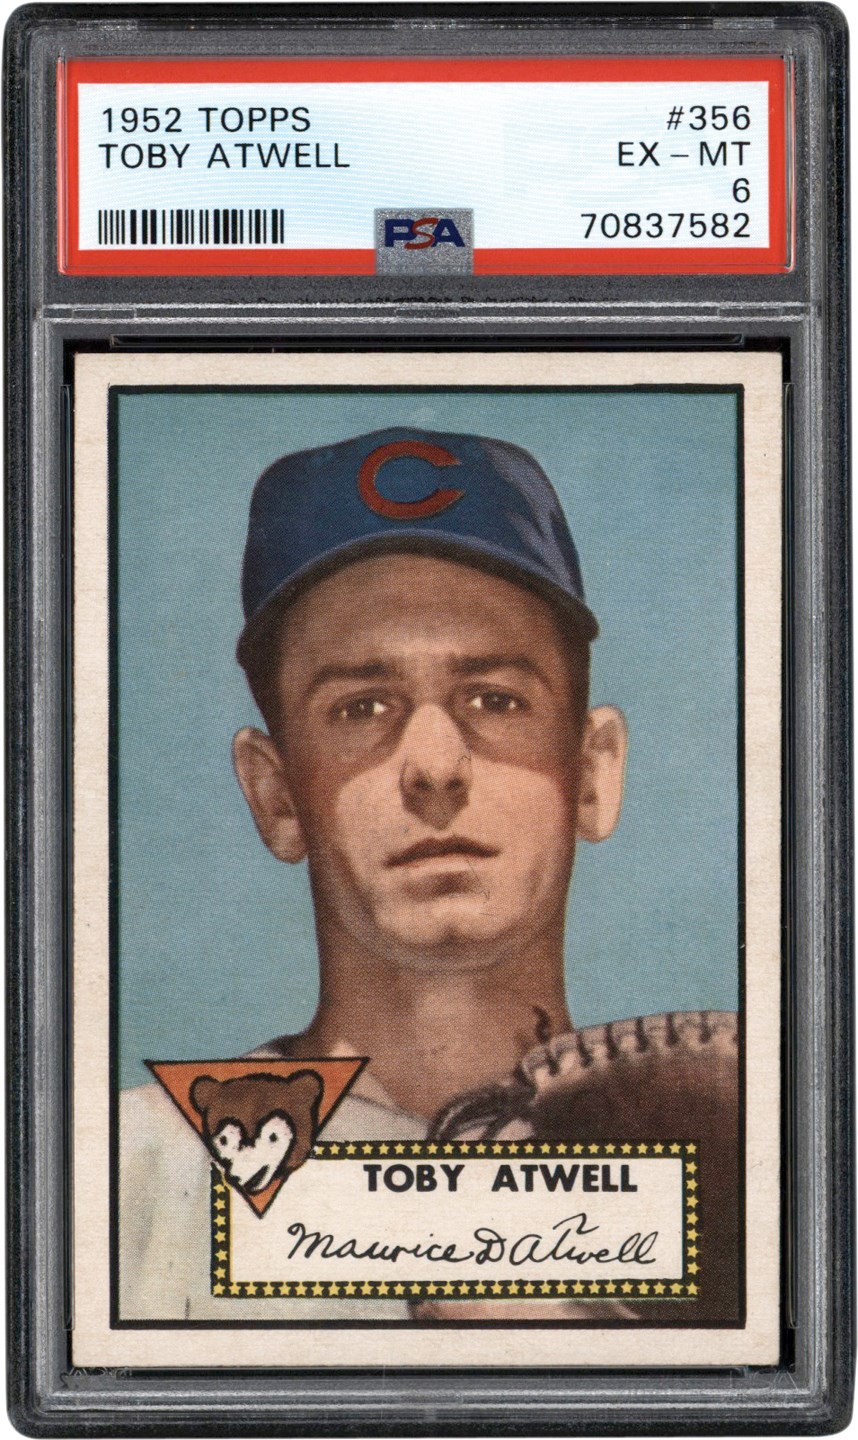 1952 Topps #356 Toby Atwell PSA EX-MT 6 - Newly Discovered Example